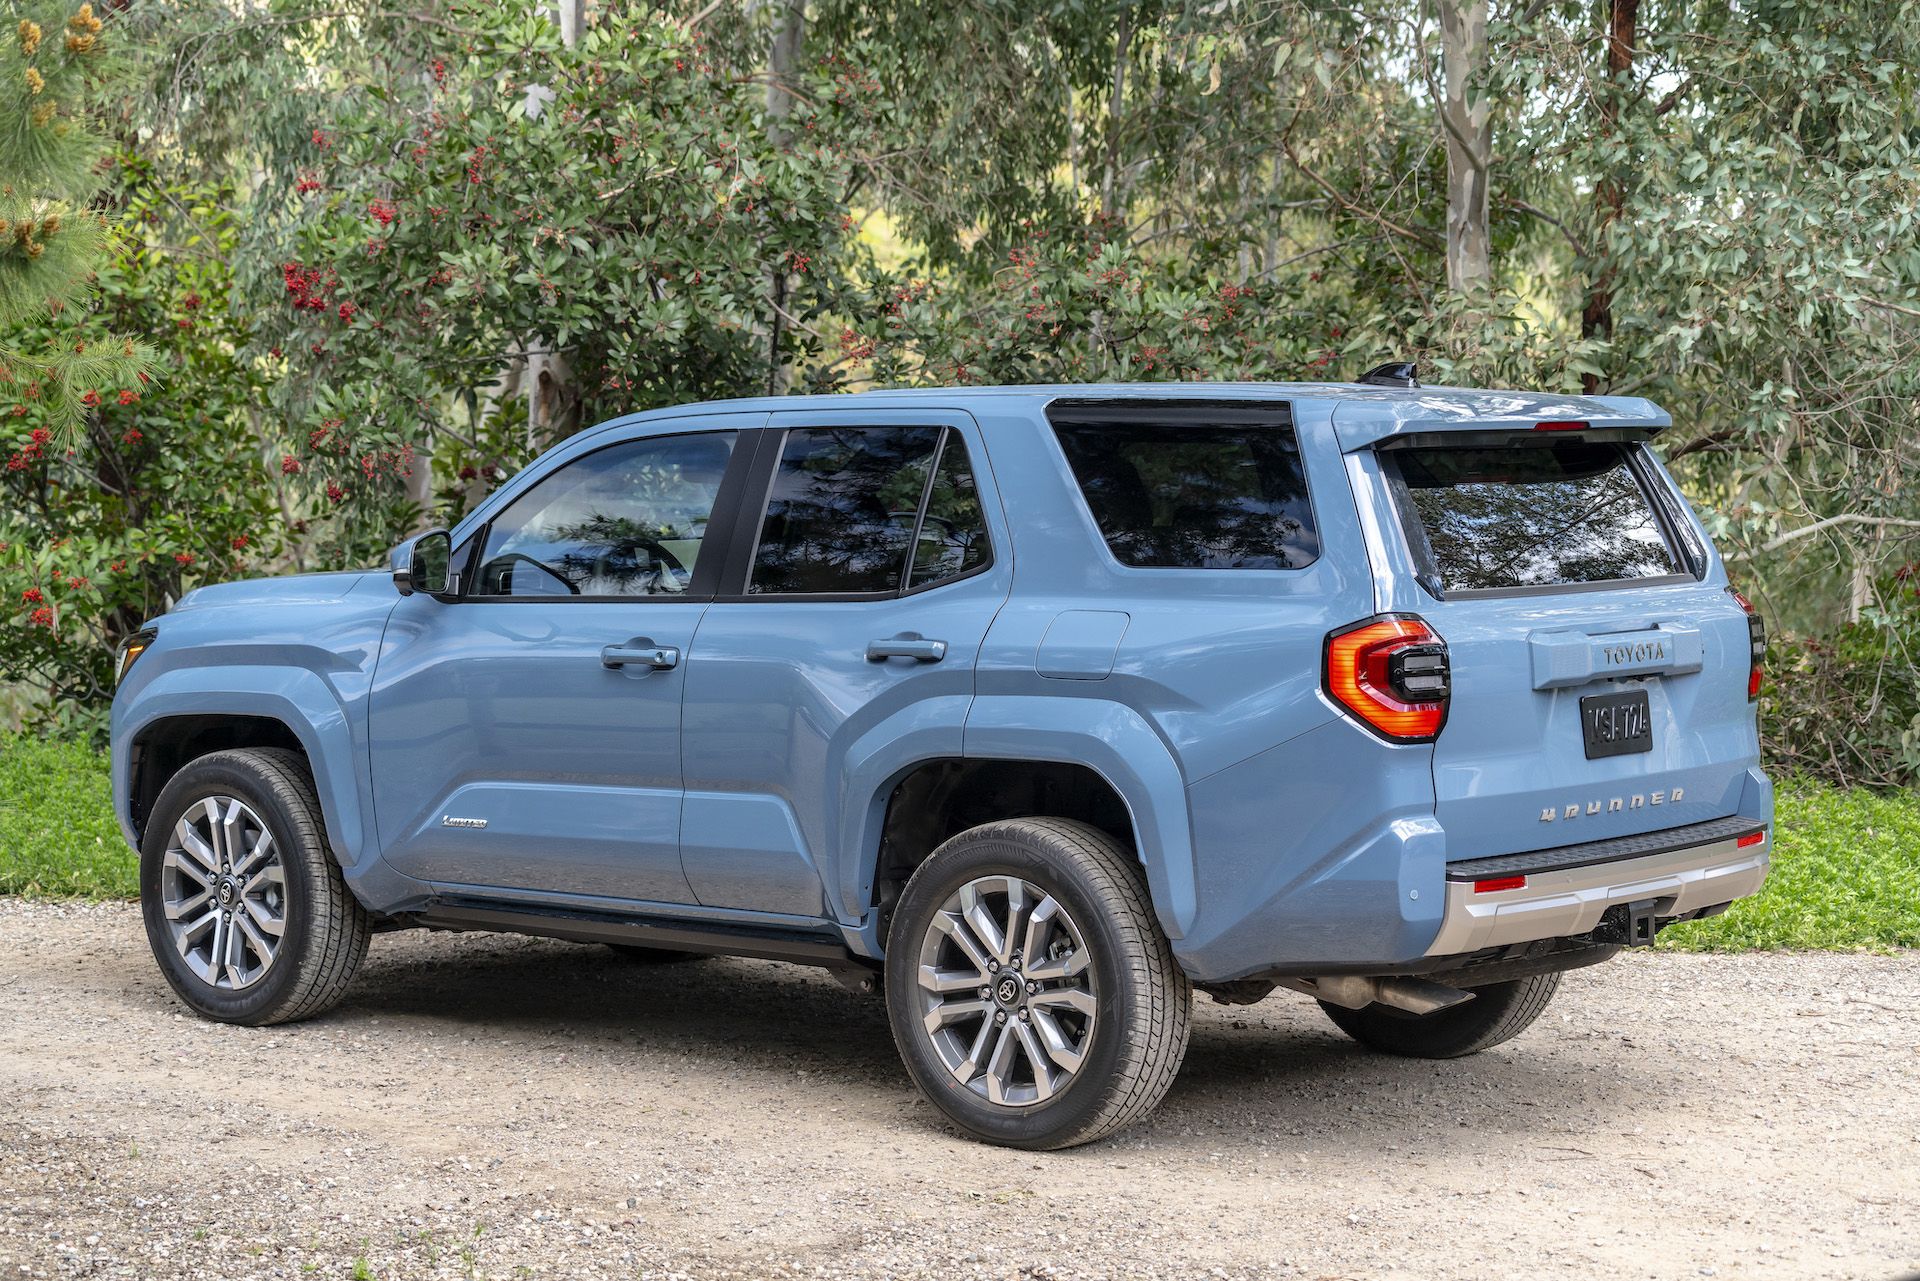 2025 Toyota 4runner Photos: 2025 4Runner LIMITED (Interior, Cargo Space, Exterior) in Heritage Blue color 2025-toyota-4runner-limited-111-jpg-6615620bef449